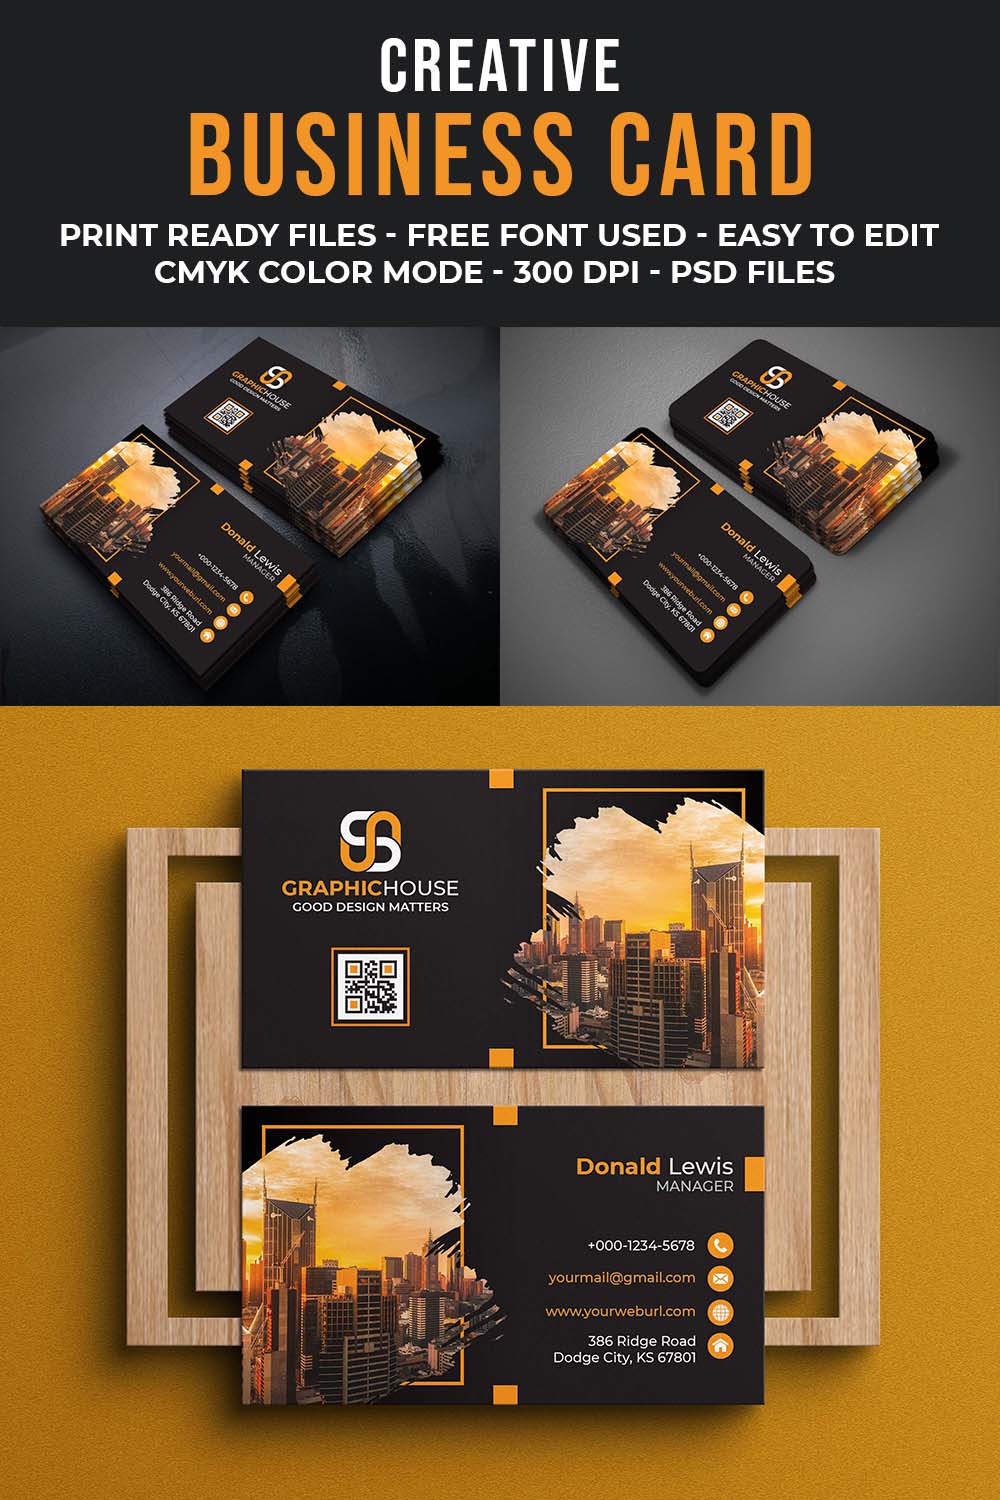 Creative And Professional Orange Business Card Template Pinterest Image.